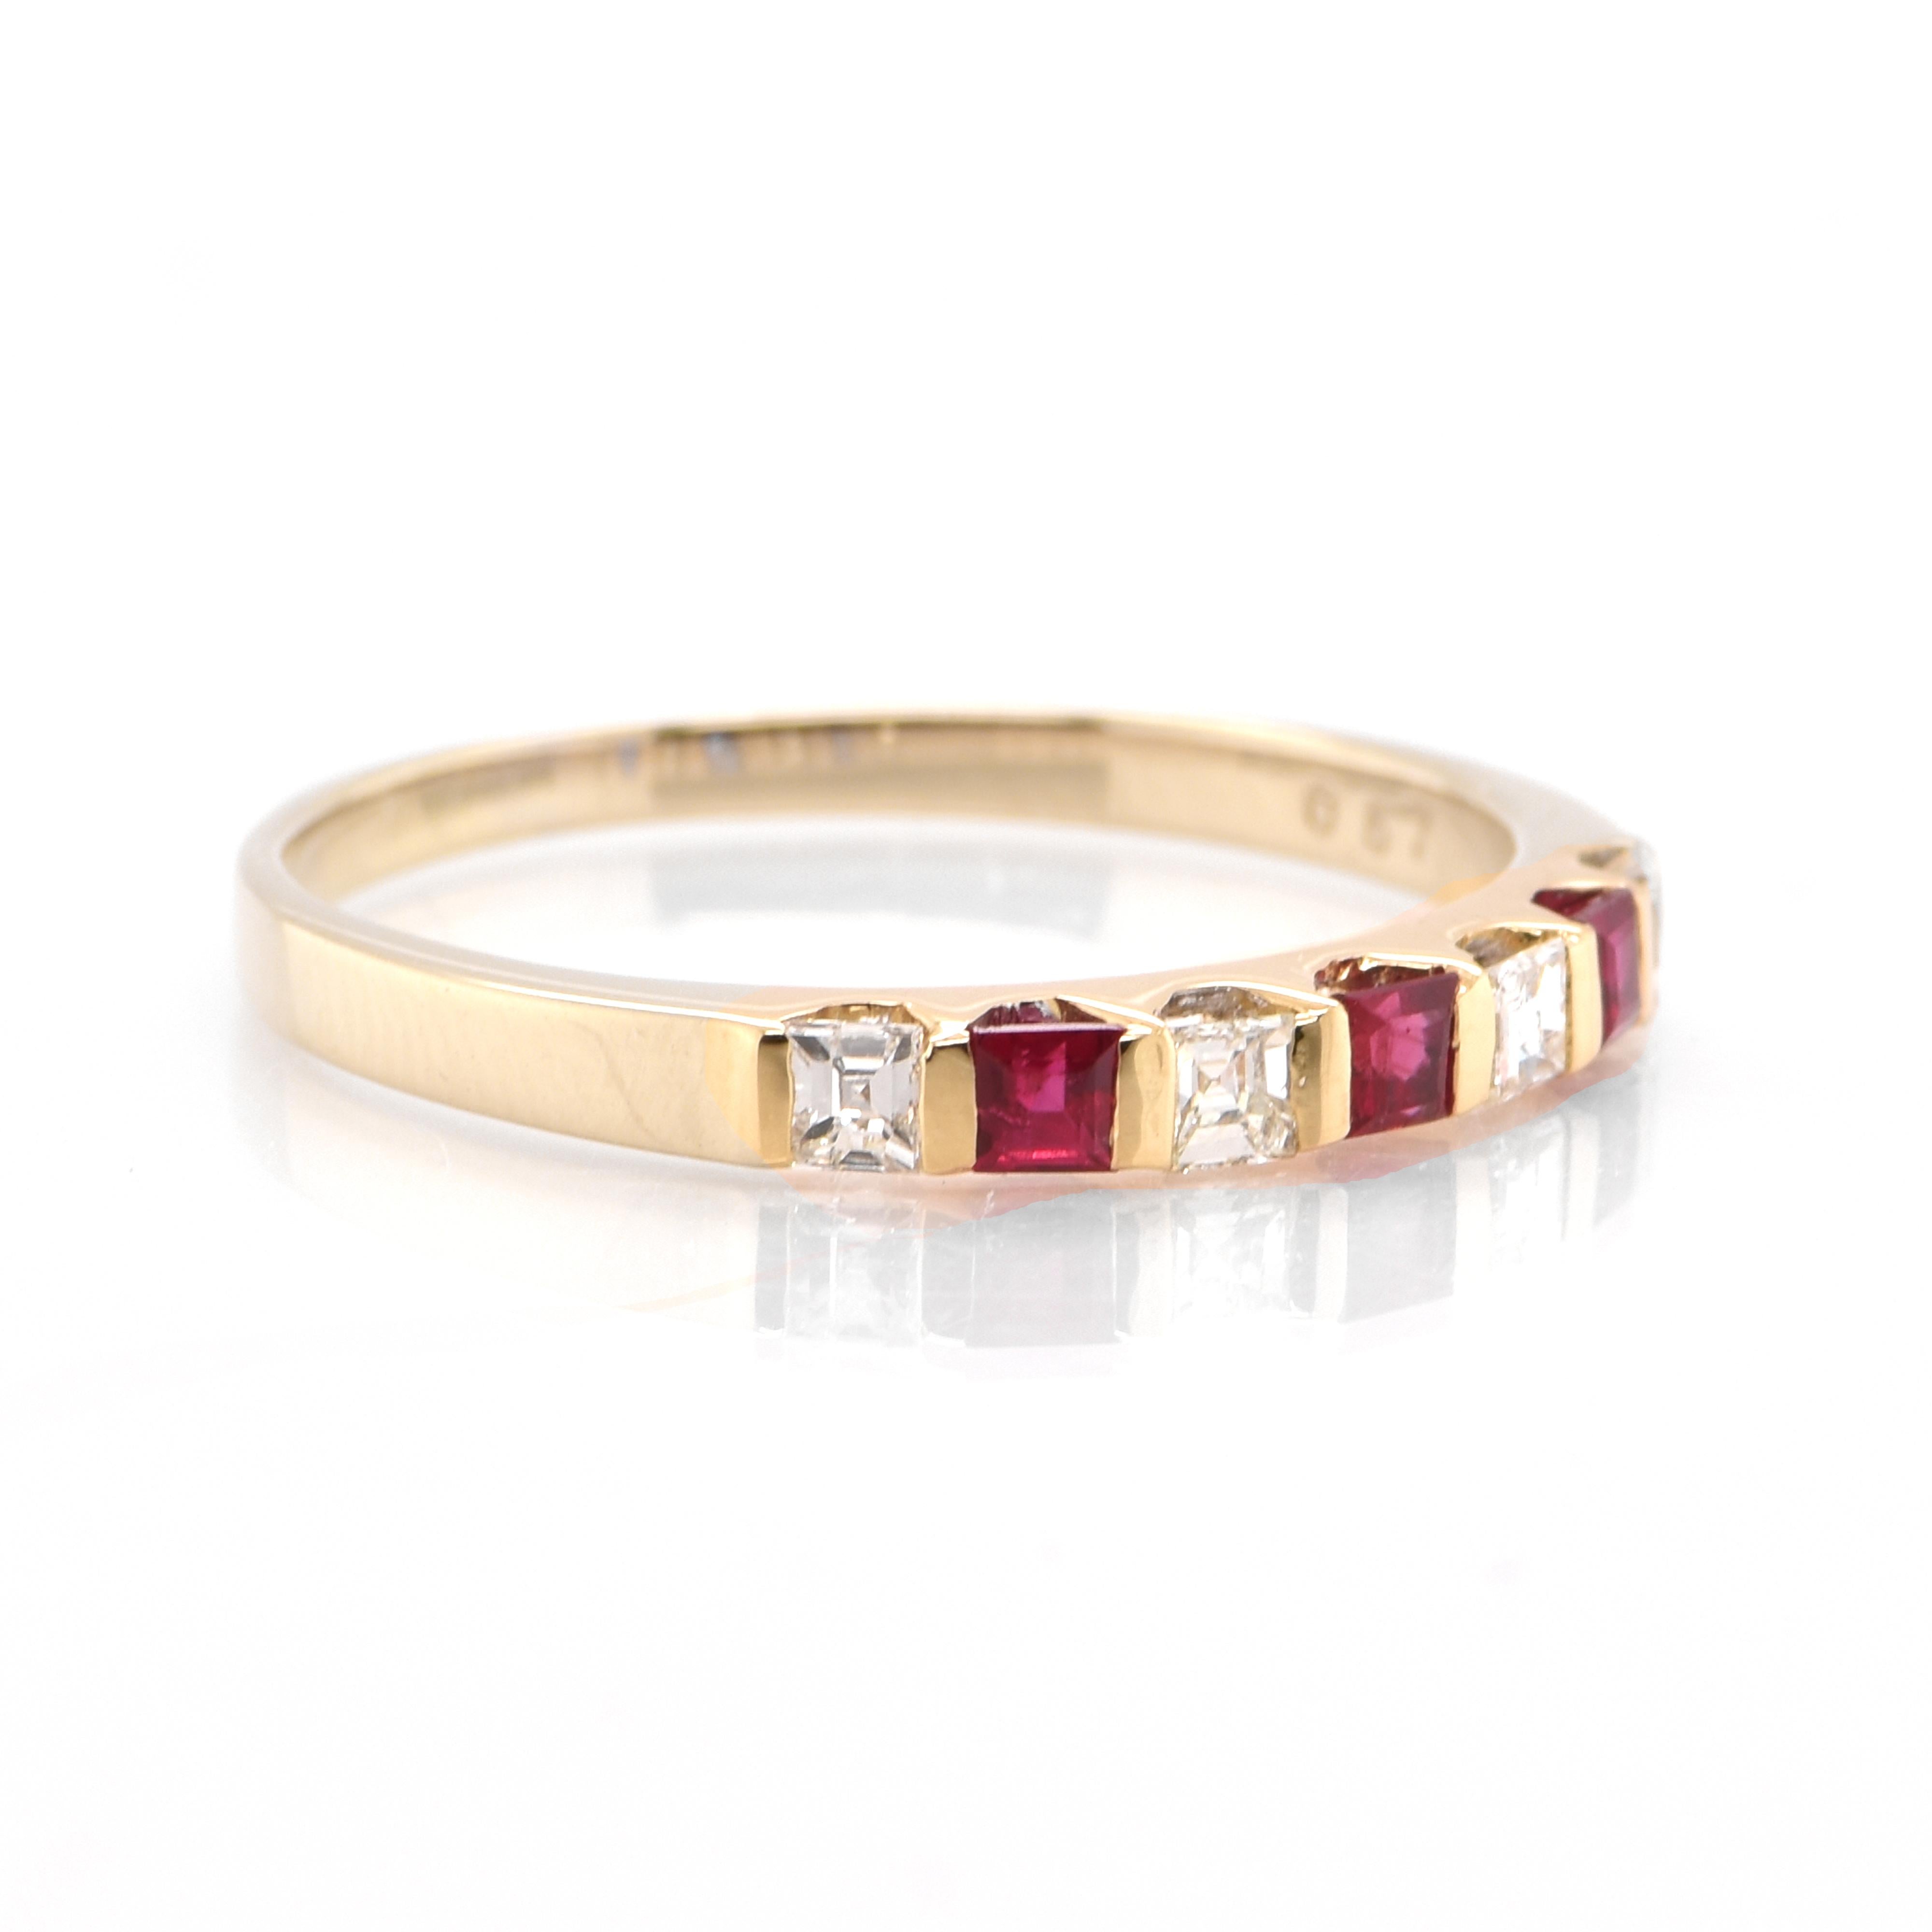 Women's Natural Ruby, Sapphire and Emerald Stackable Rings Set in 18 Karat Yellow Gold